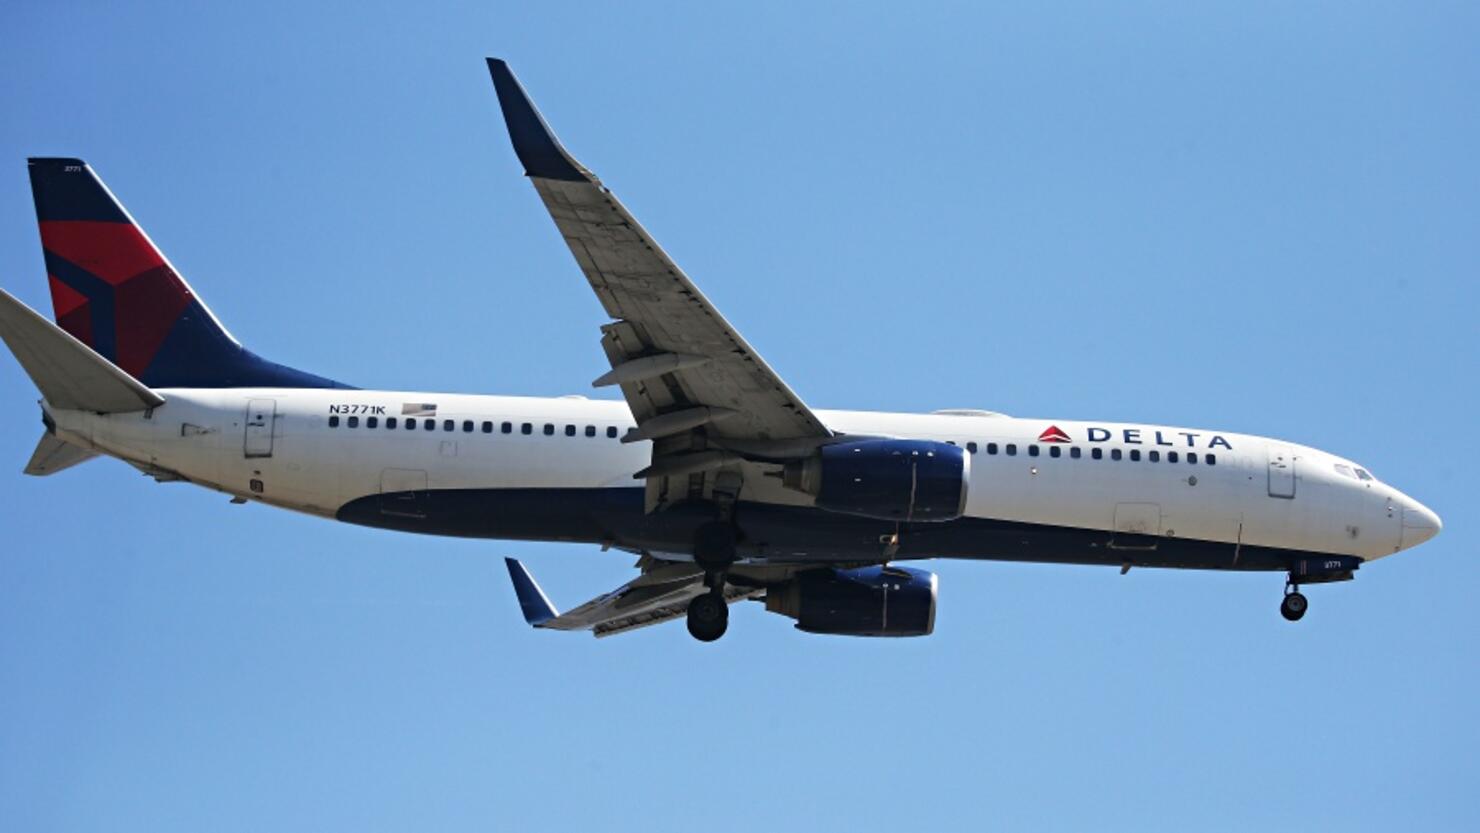 Delta Airlines To Cut Flights And Raise Fares As Fuel Costs Surge